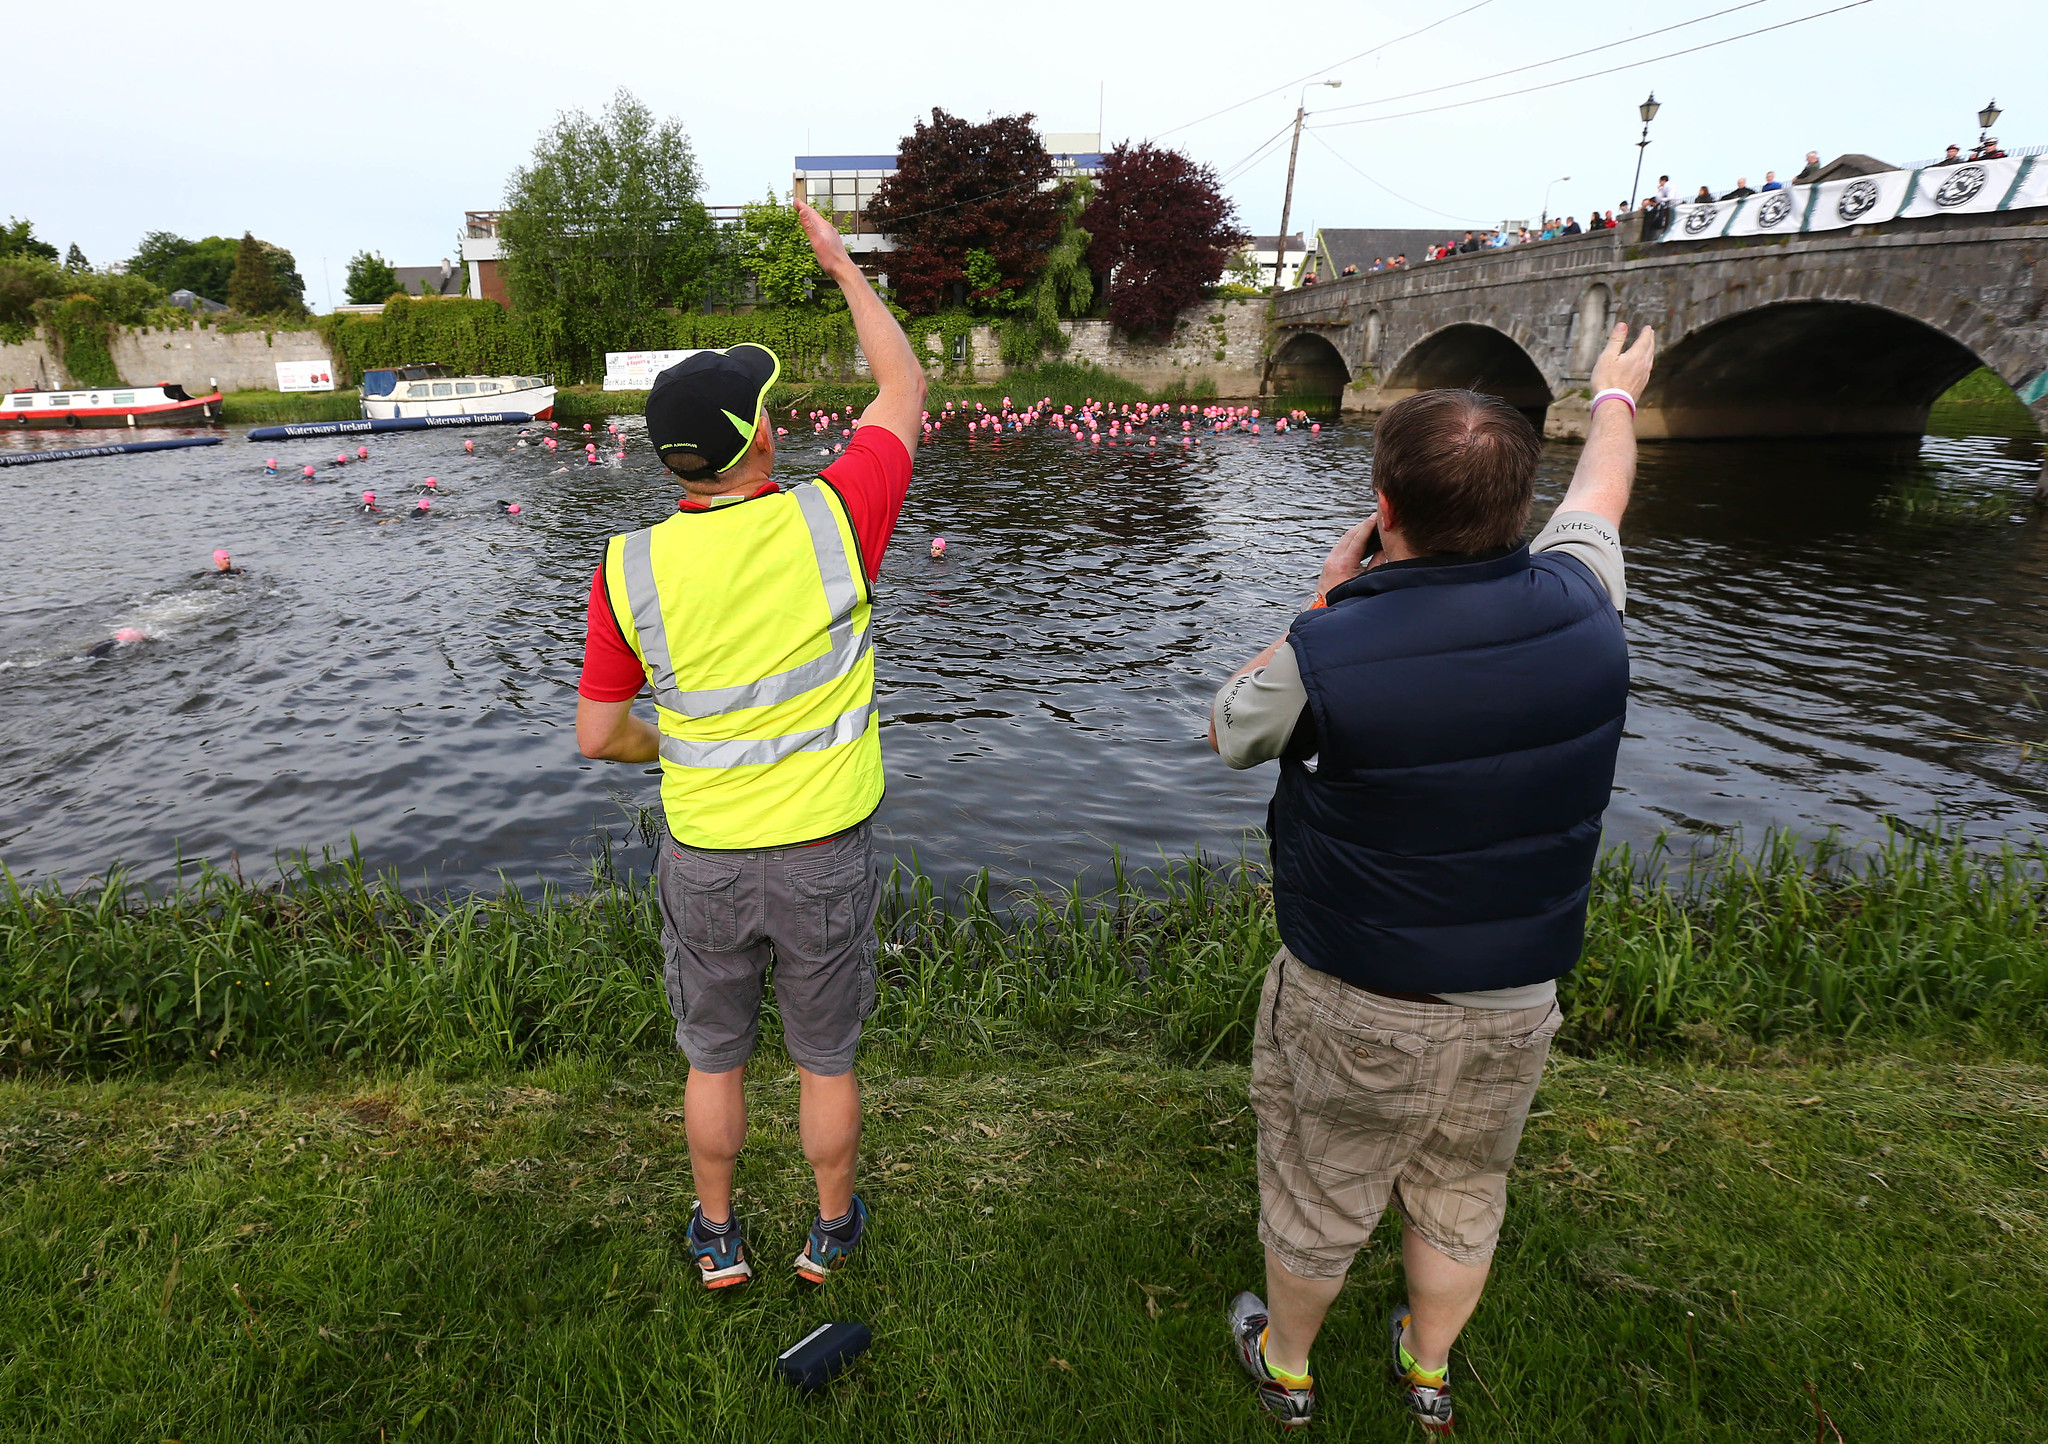 Competitors get ready to the start the swim section 30/5/2015 - TriAthy - IX Edition - 31 May 2015